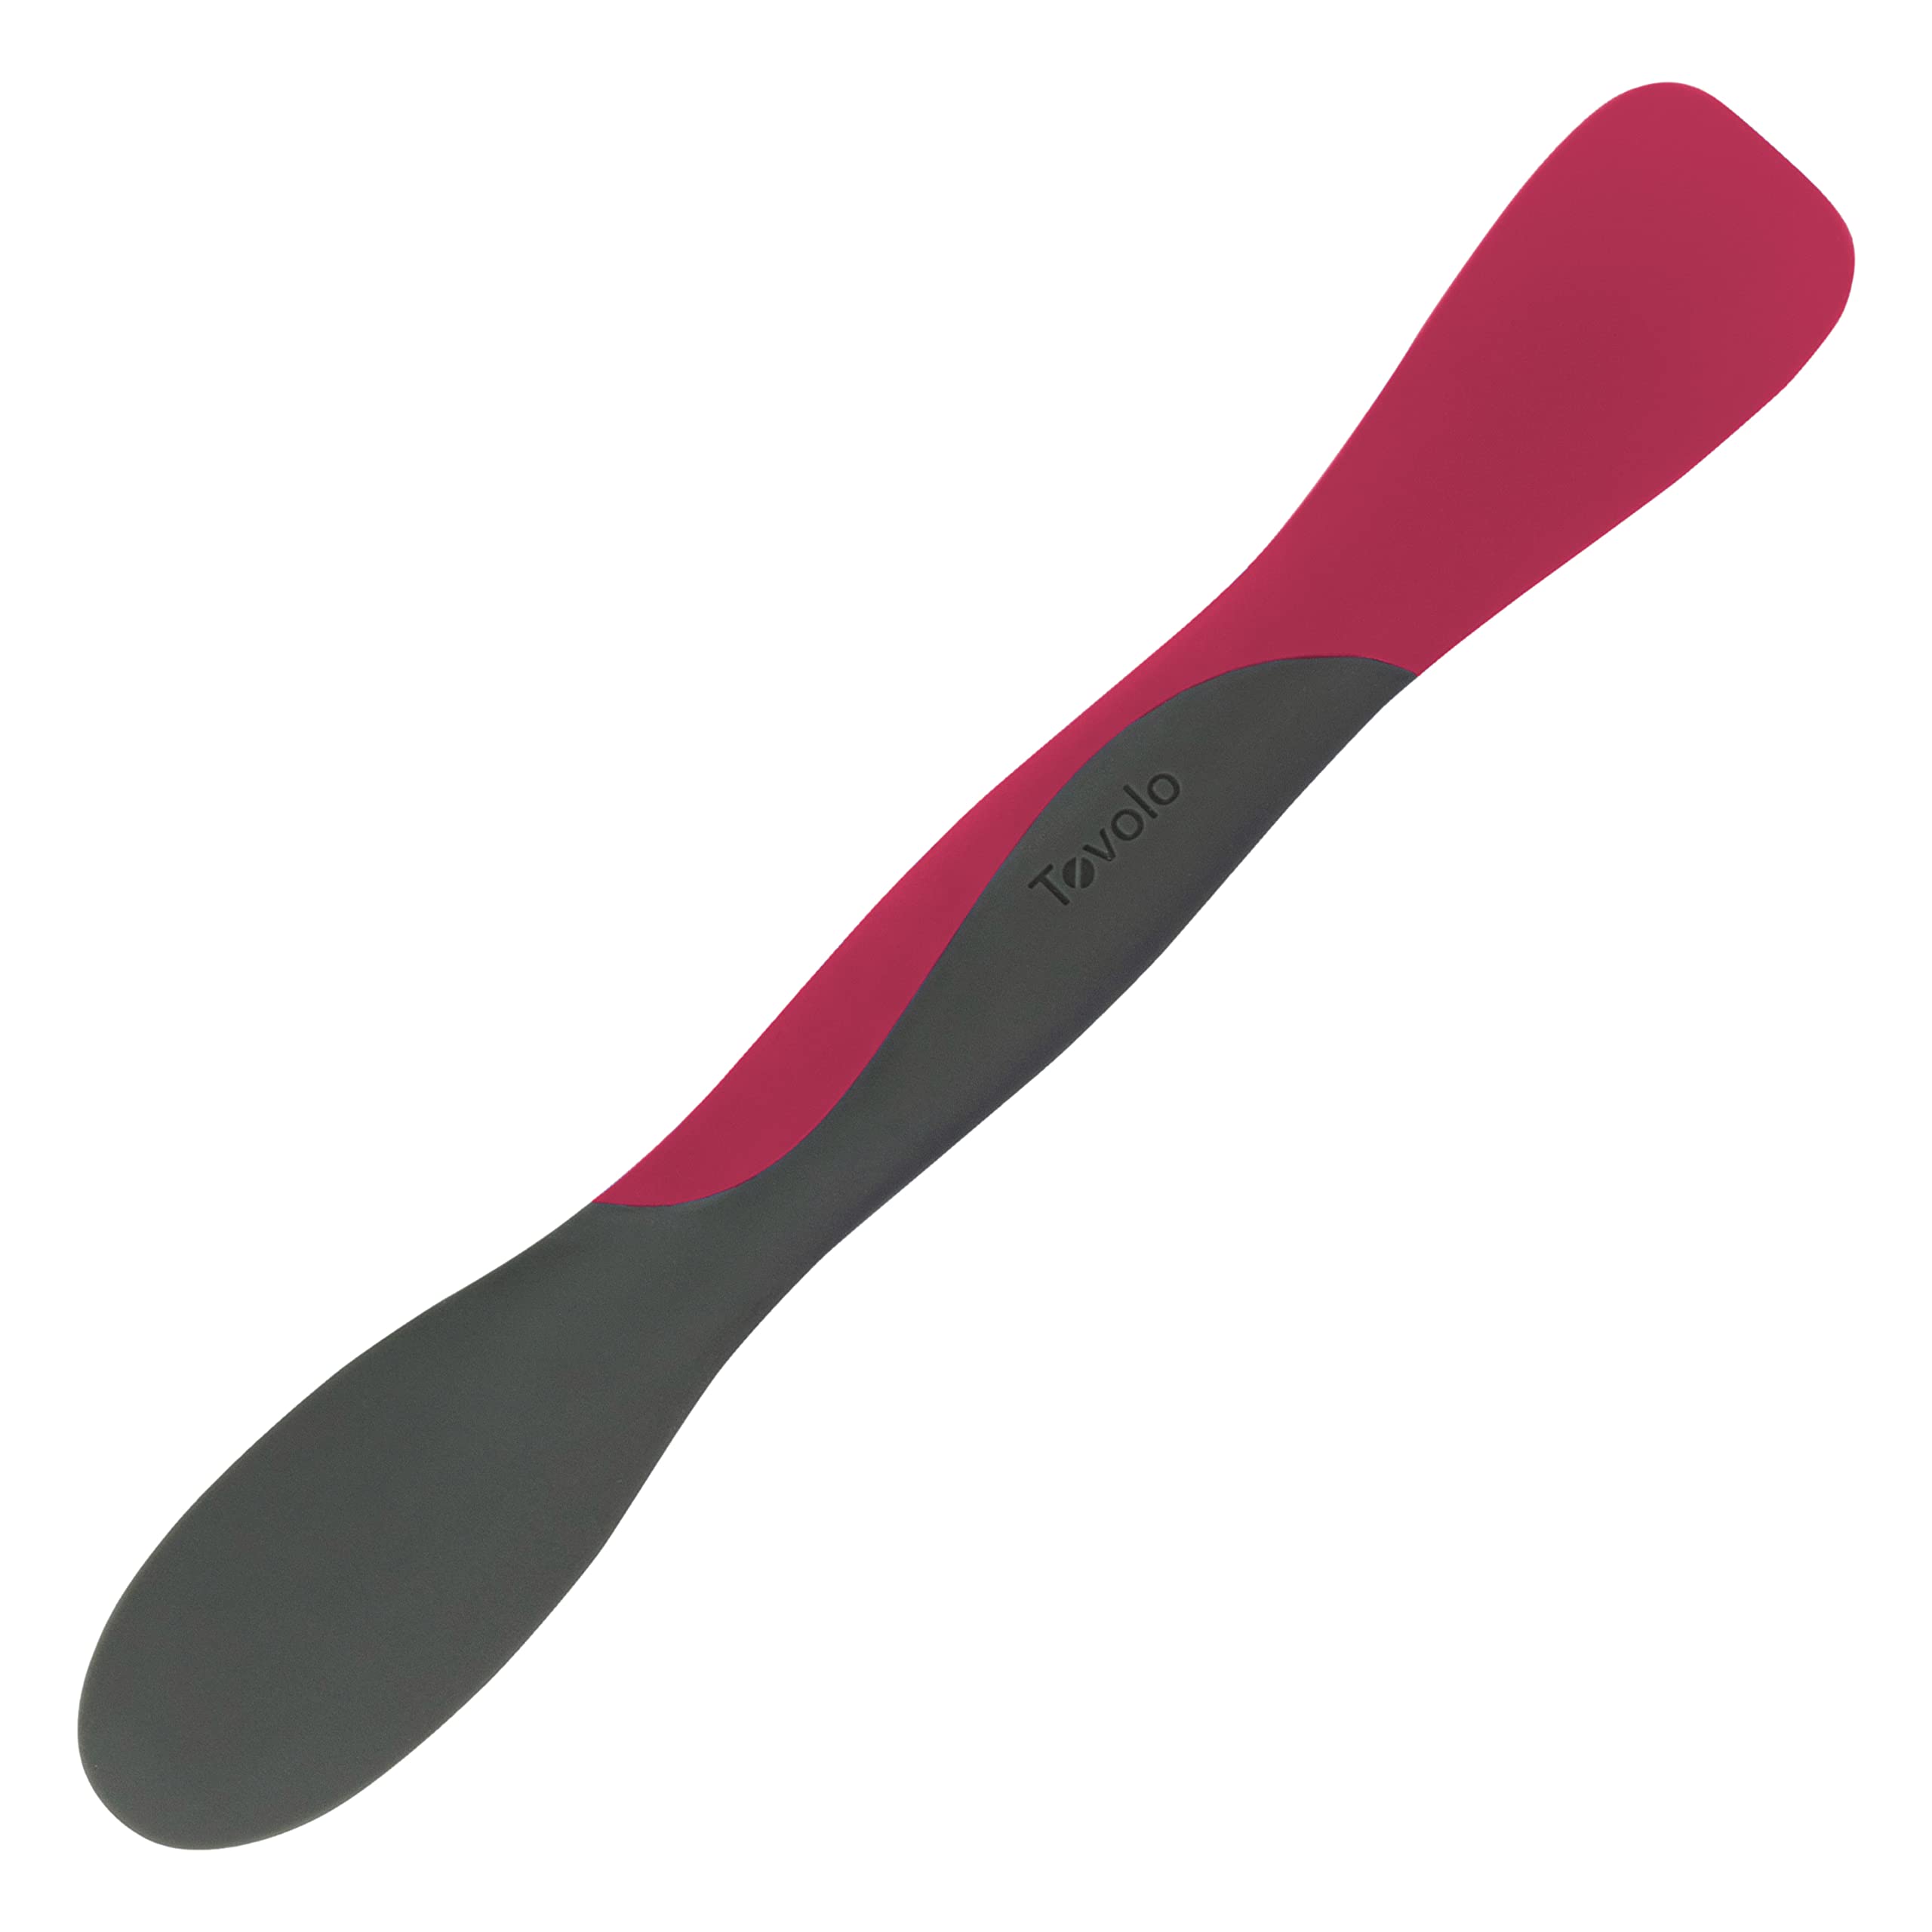 Tovolo Tool for Kitchen Meal Prep to Scoop Spread Slice and Scrape - Charcoal & Viva Magenta